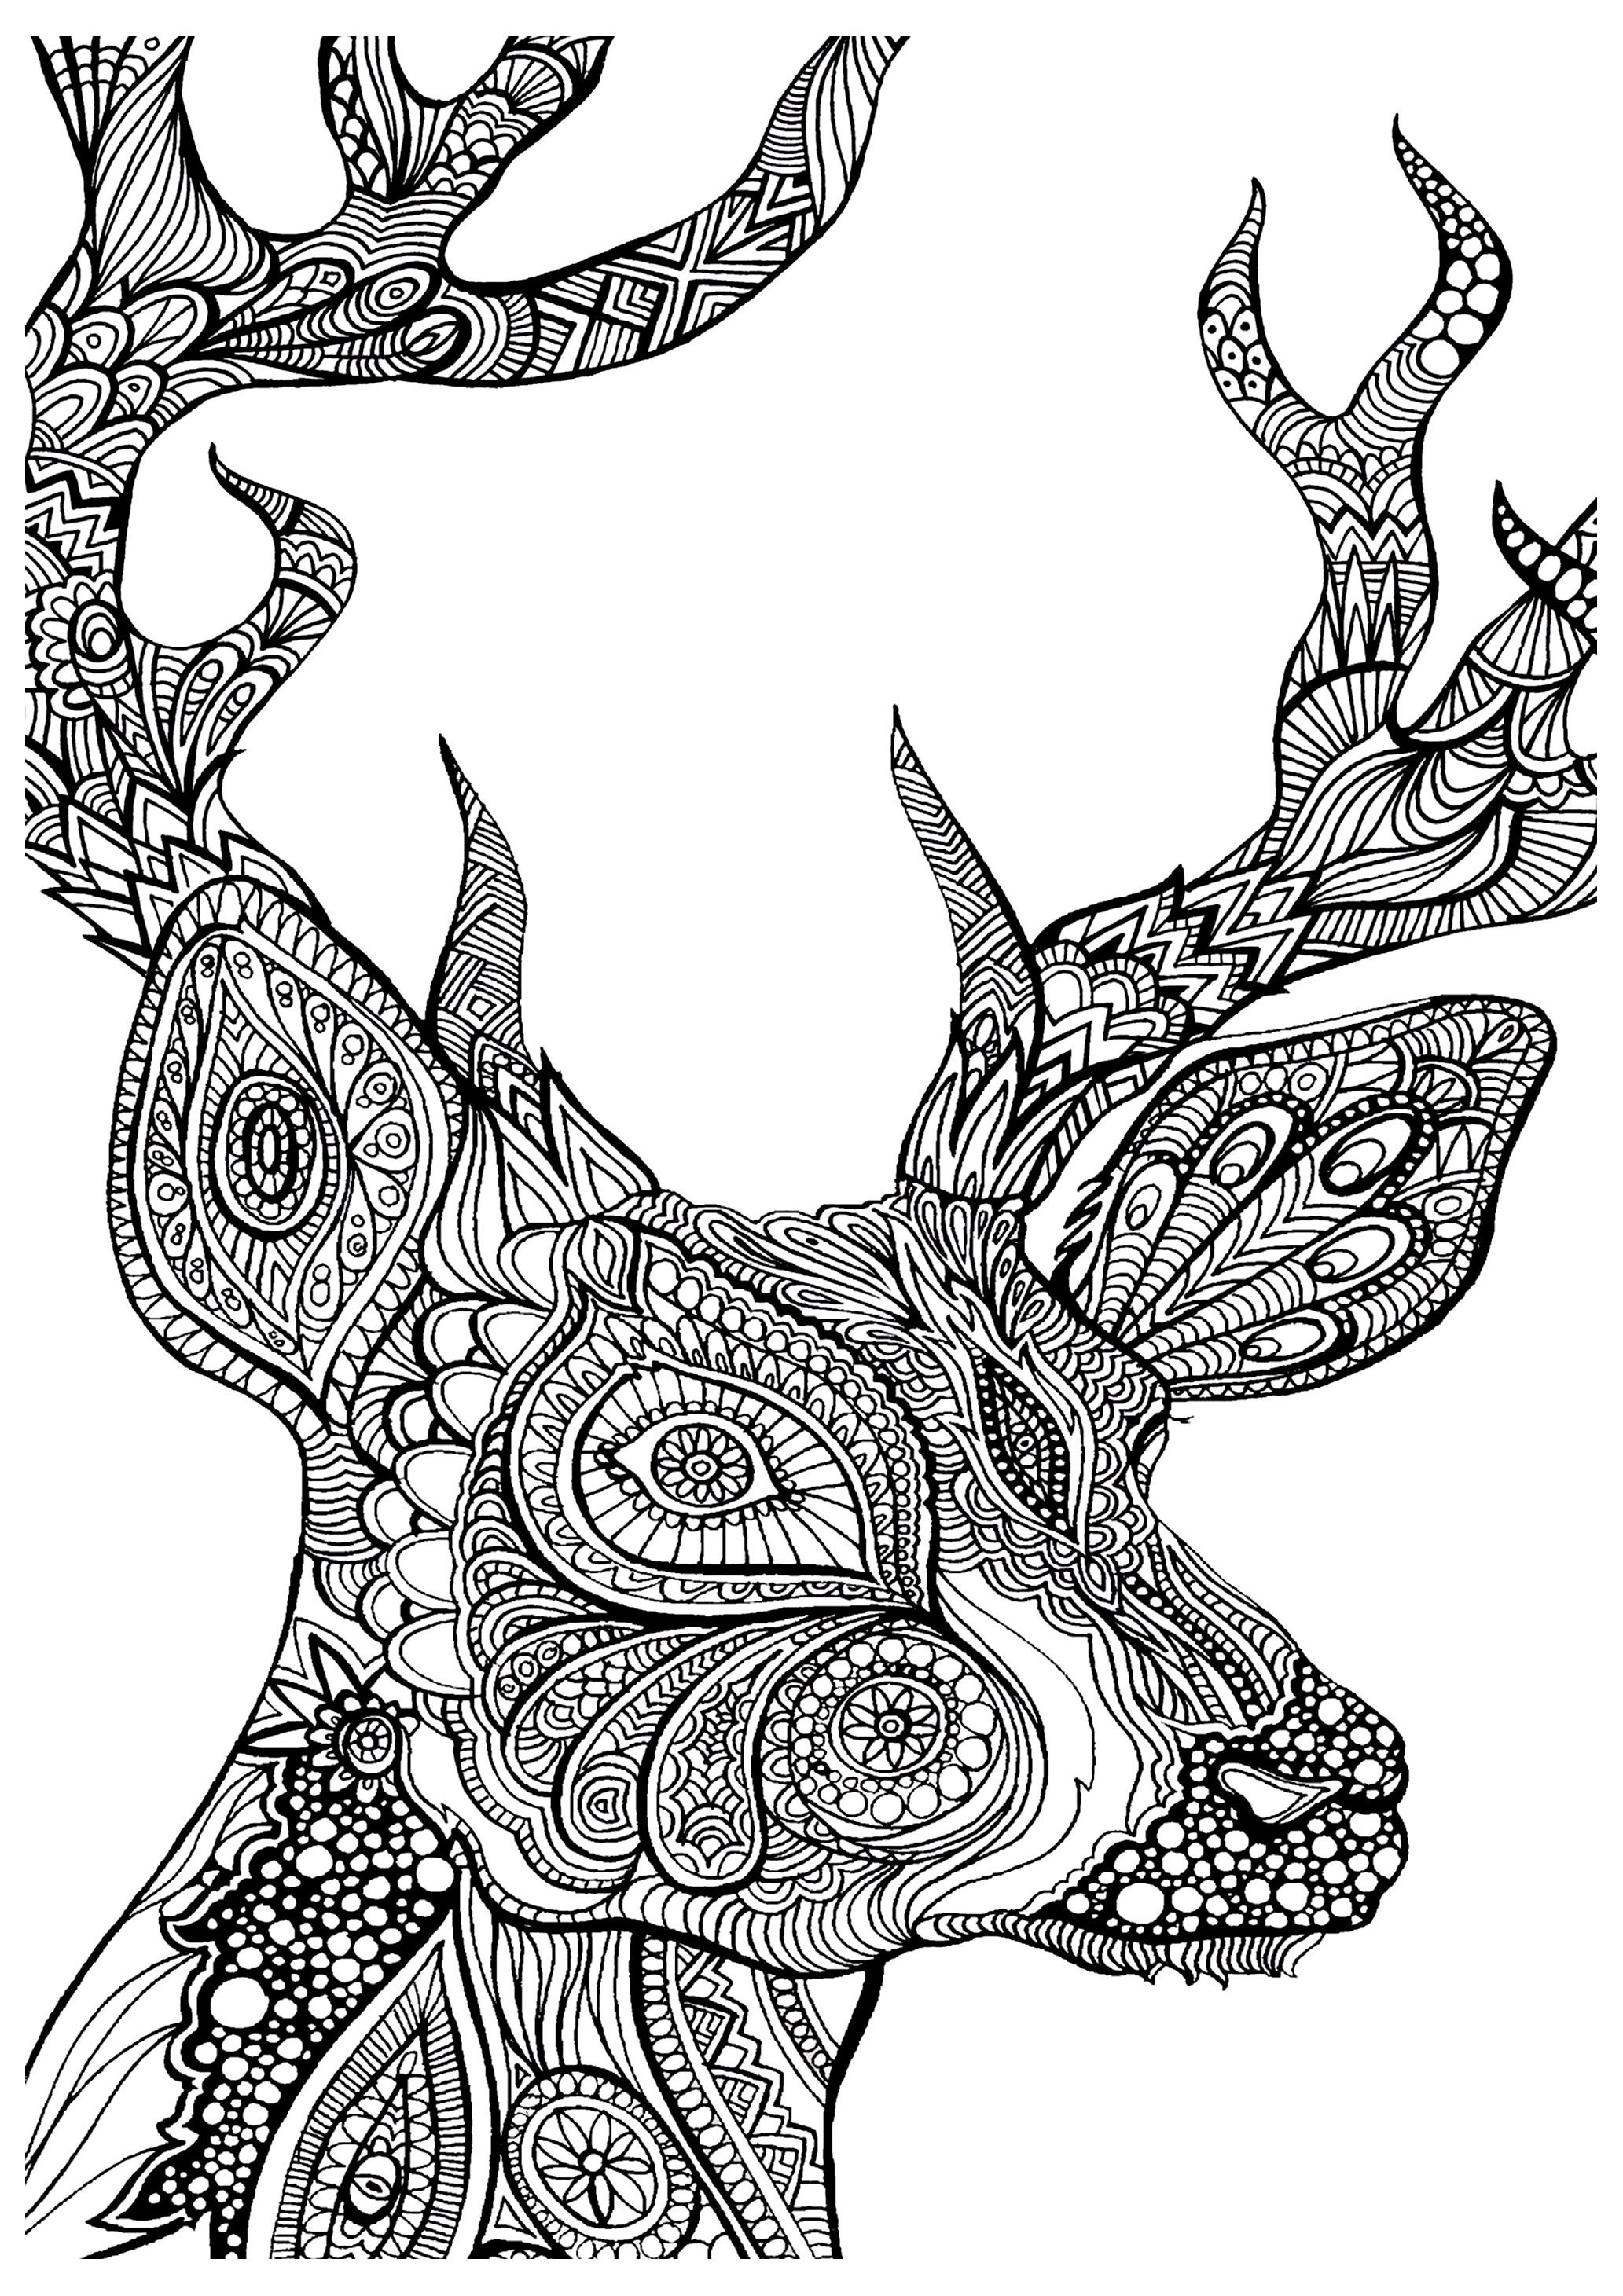 Adult Printable Coloring Pages
 19 of the Best Adult Colouring Pages Free Printables for